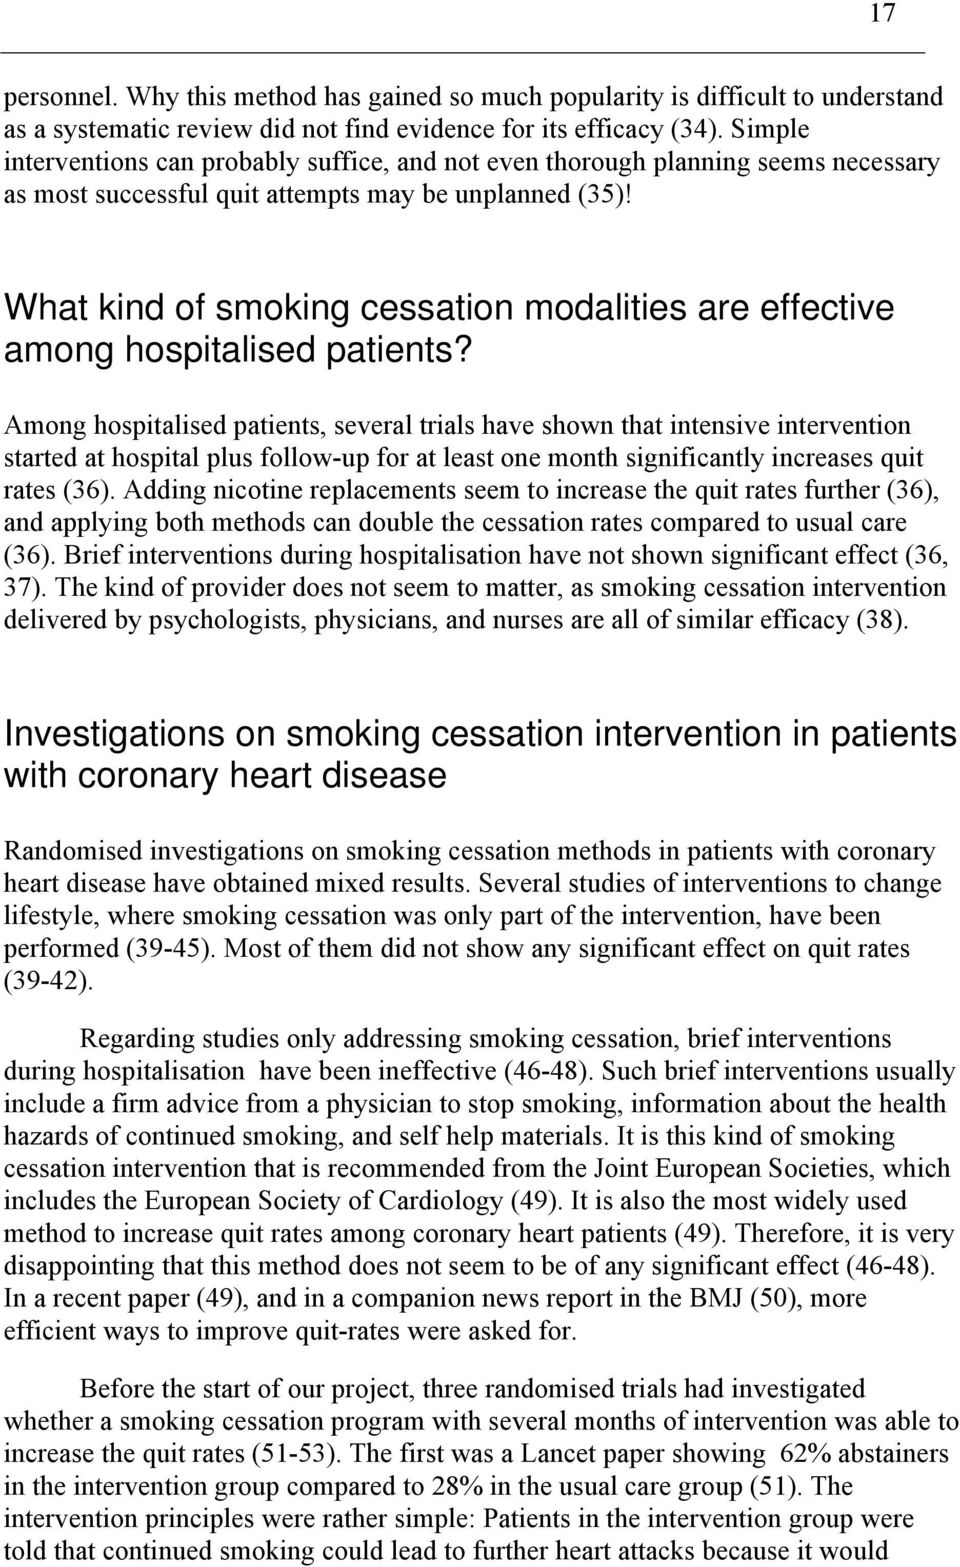 What kind of smoking cessation modalities are effective among hospitalised patients?